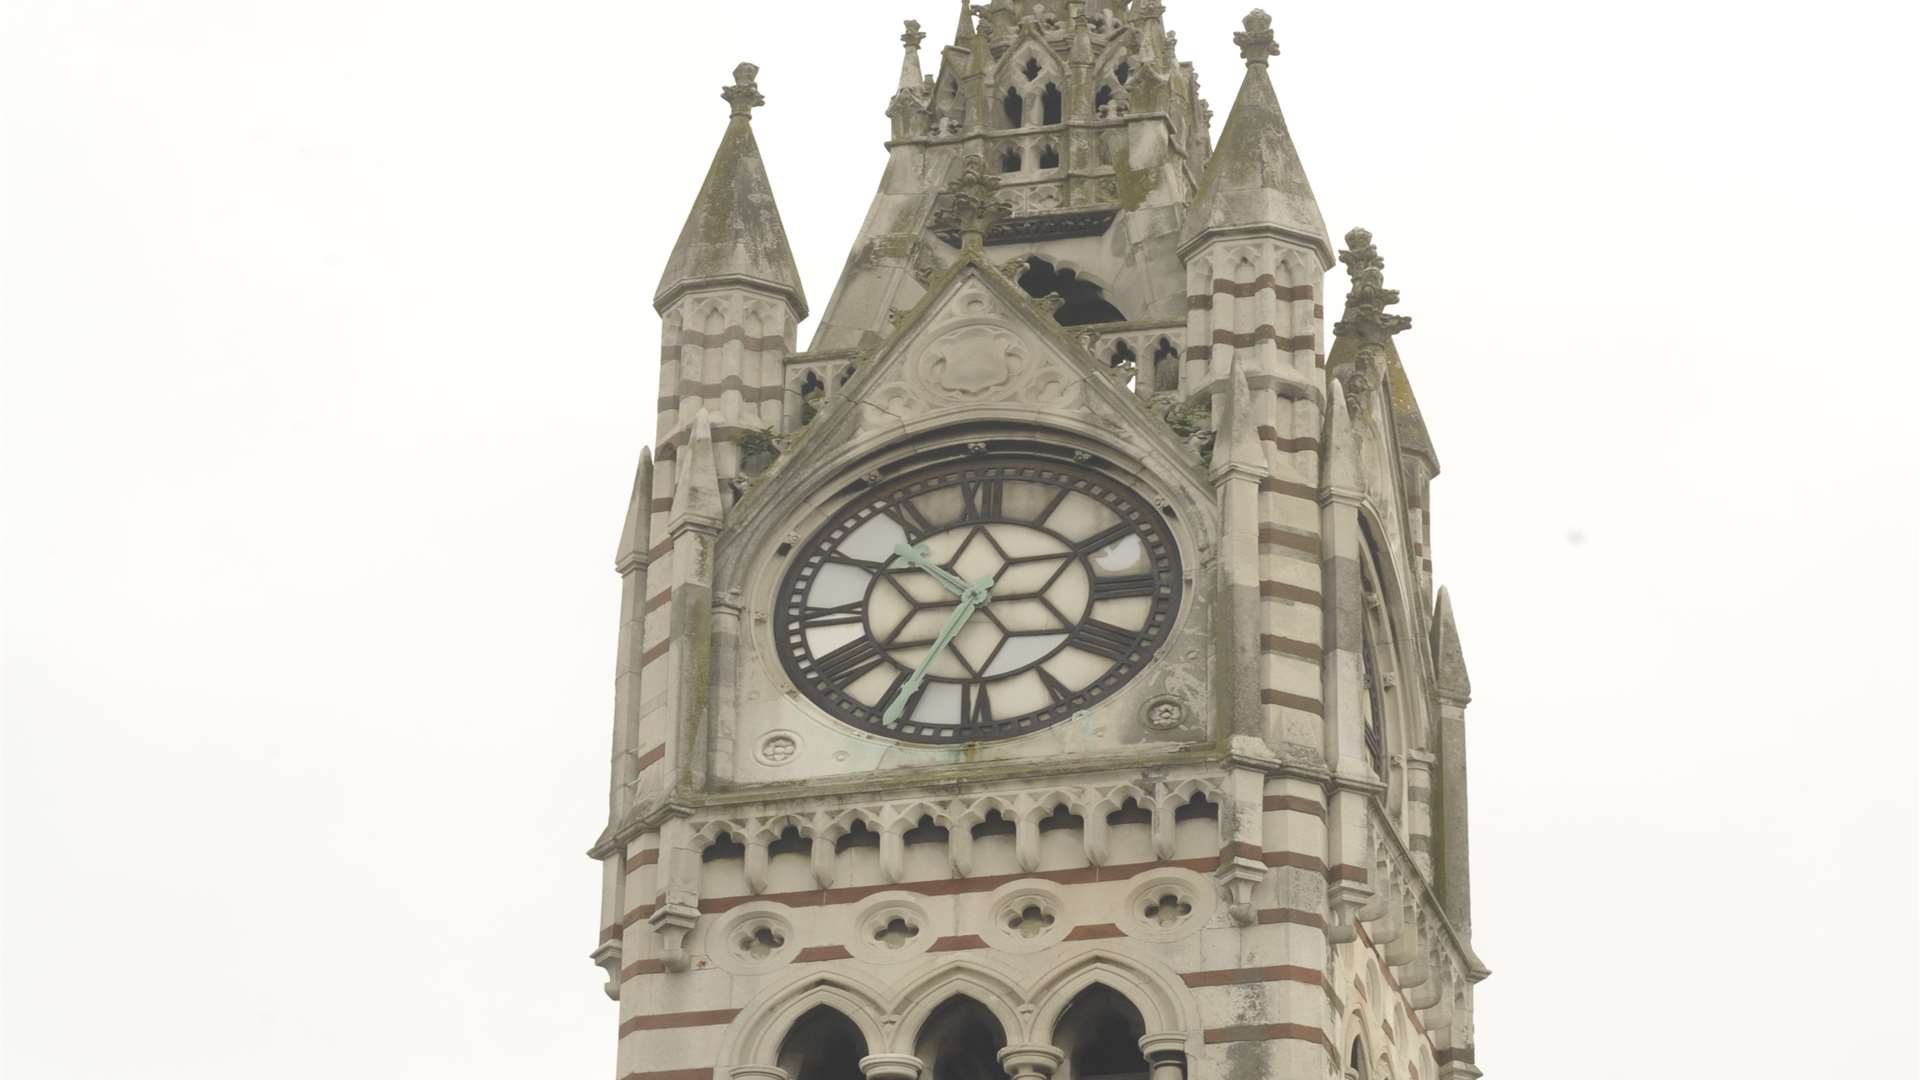 The clock tower will undergo a £215,000 makeover.